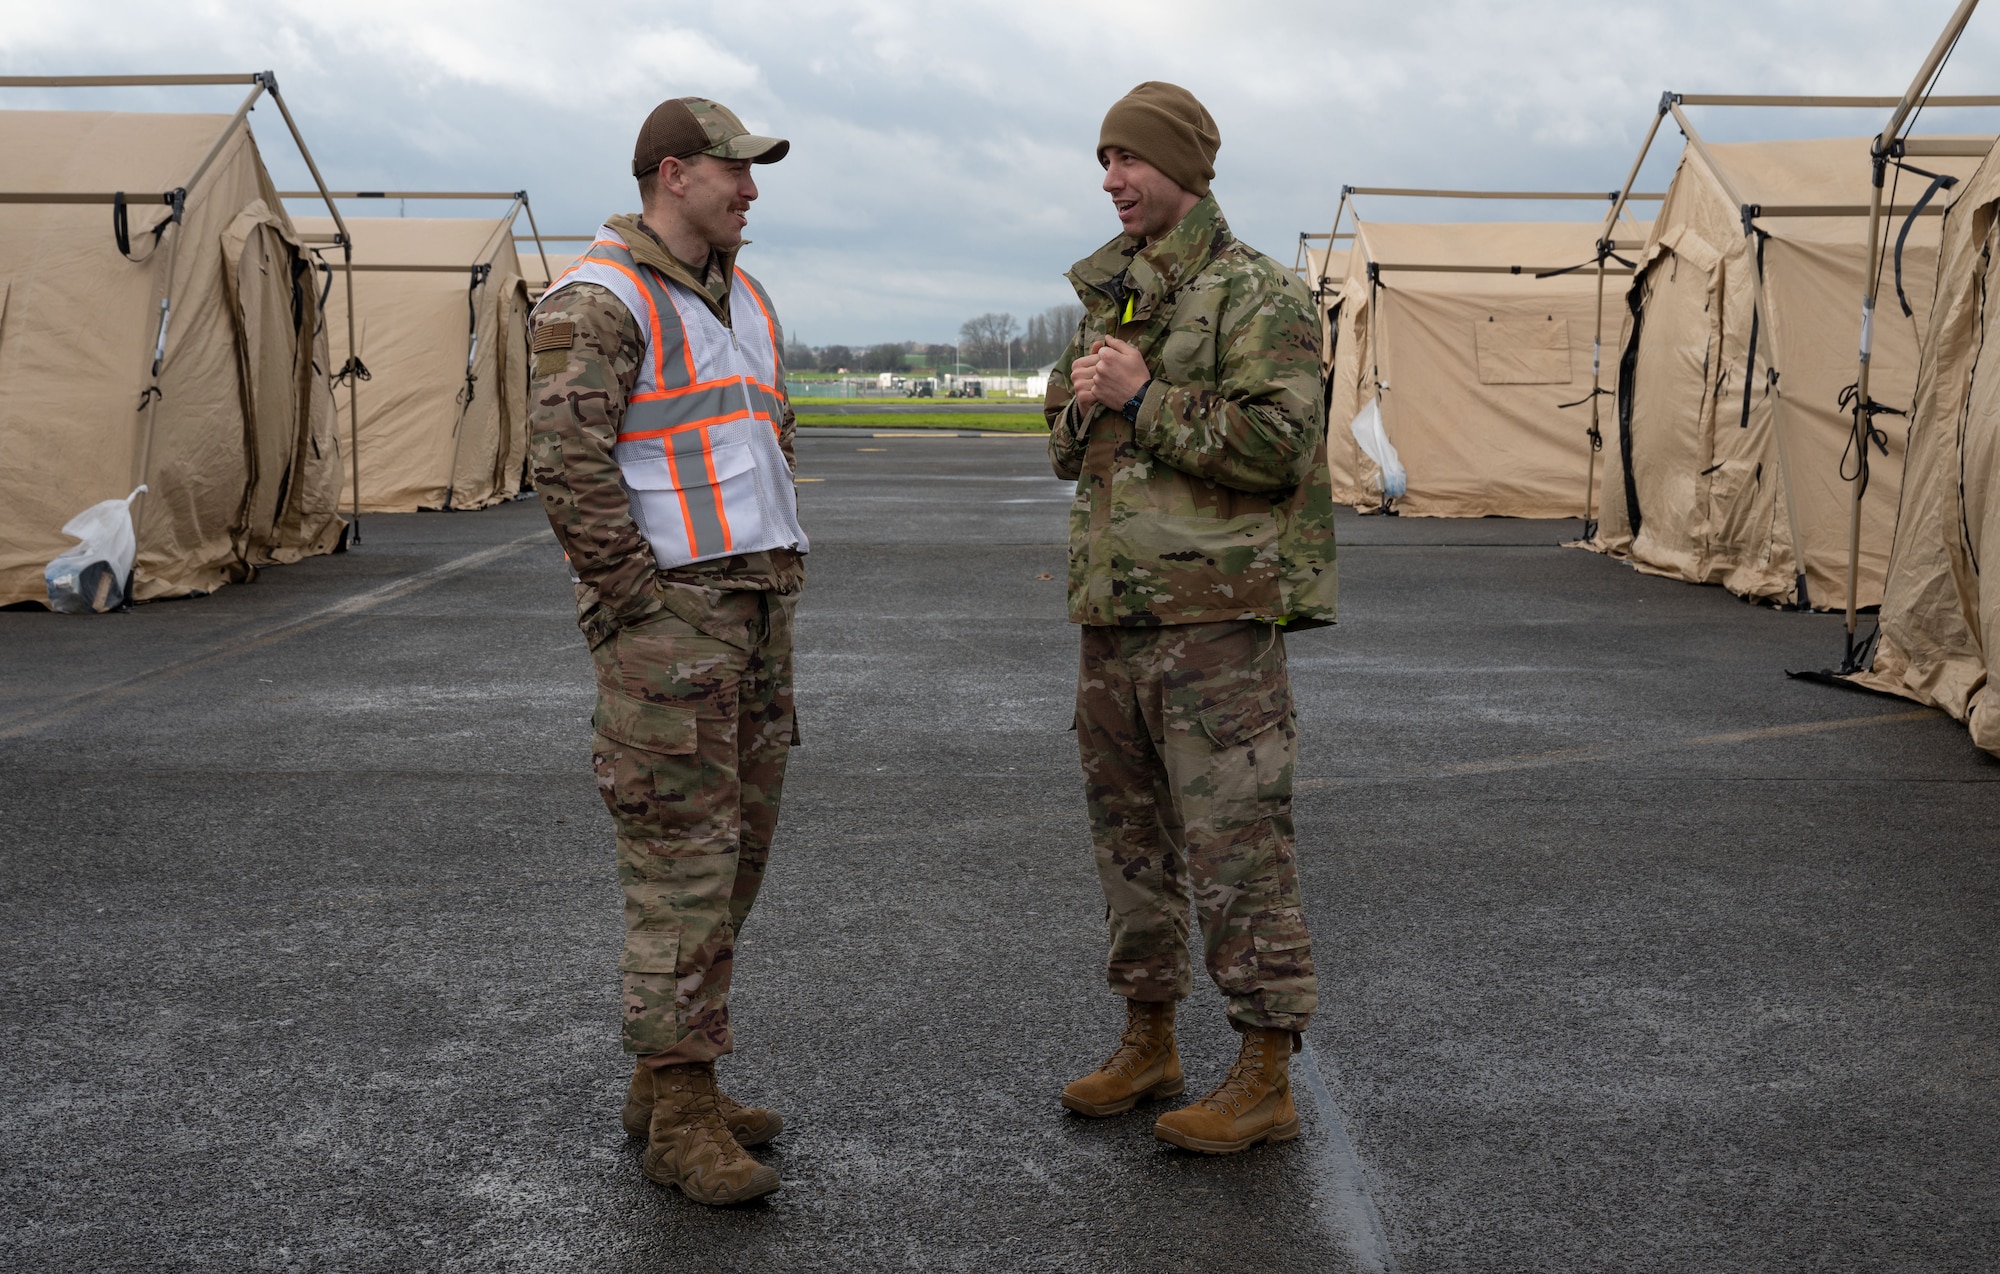 U.S. Air Force Maj. Andrew Weubold, right, 435th Contingency Response Group, contingency response element commander, discusses the upcoming redeployment to Ramstein Air Base, Germany, with Master Sgt. Blake Fagan, 435th CRG operations superintendent and white cell evaluator, during Exercise Agile Bison at Chièvres Air Base, Belgium, March 13, 2023.